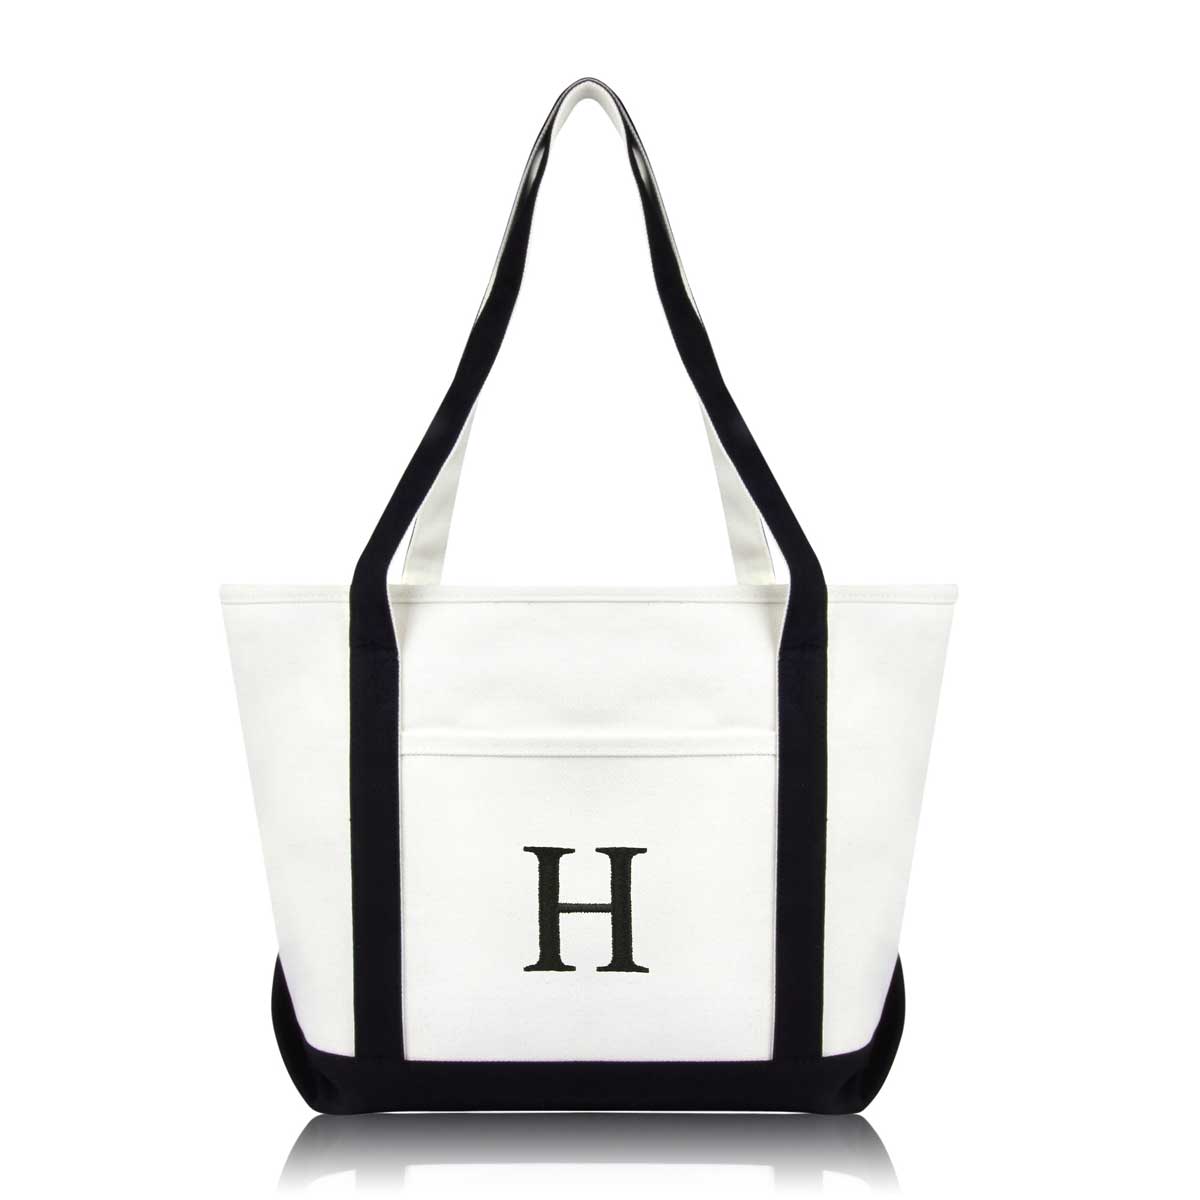 Dalix Medium Personalized Tote Bag Monogrammed Initial Letter - H